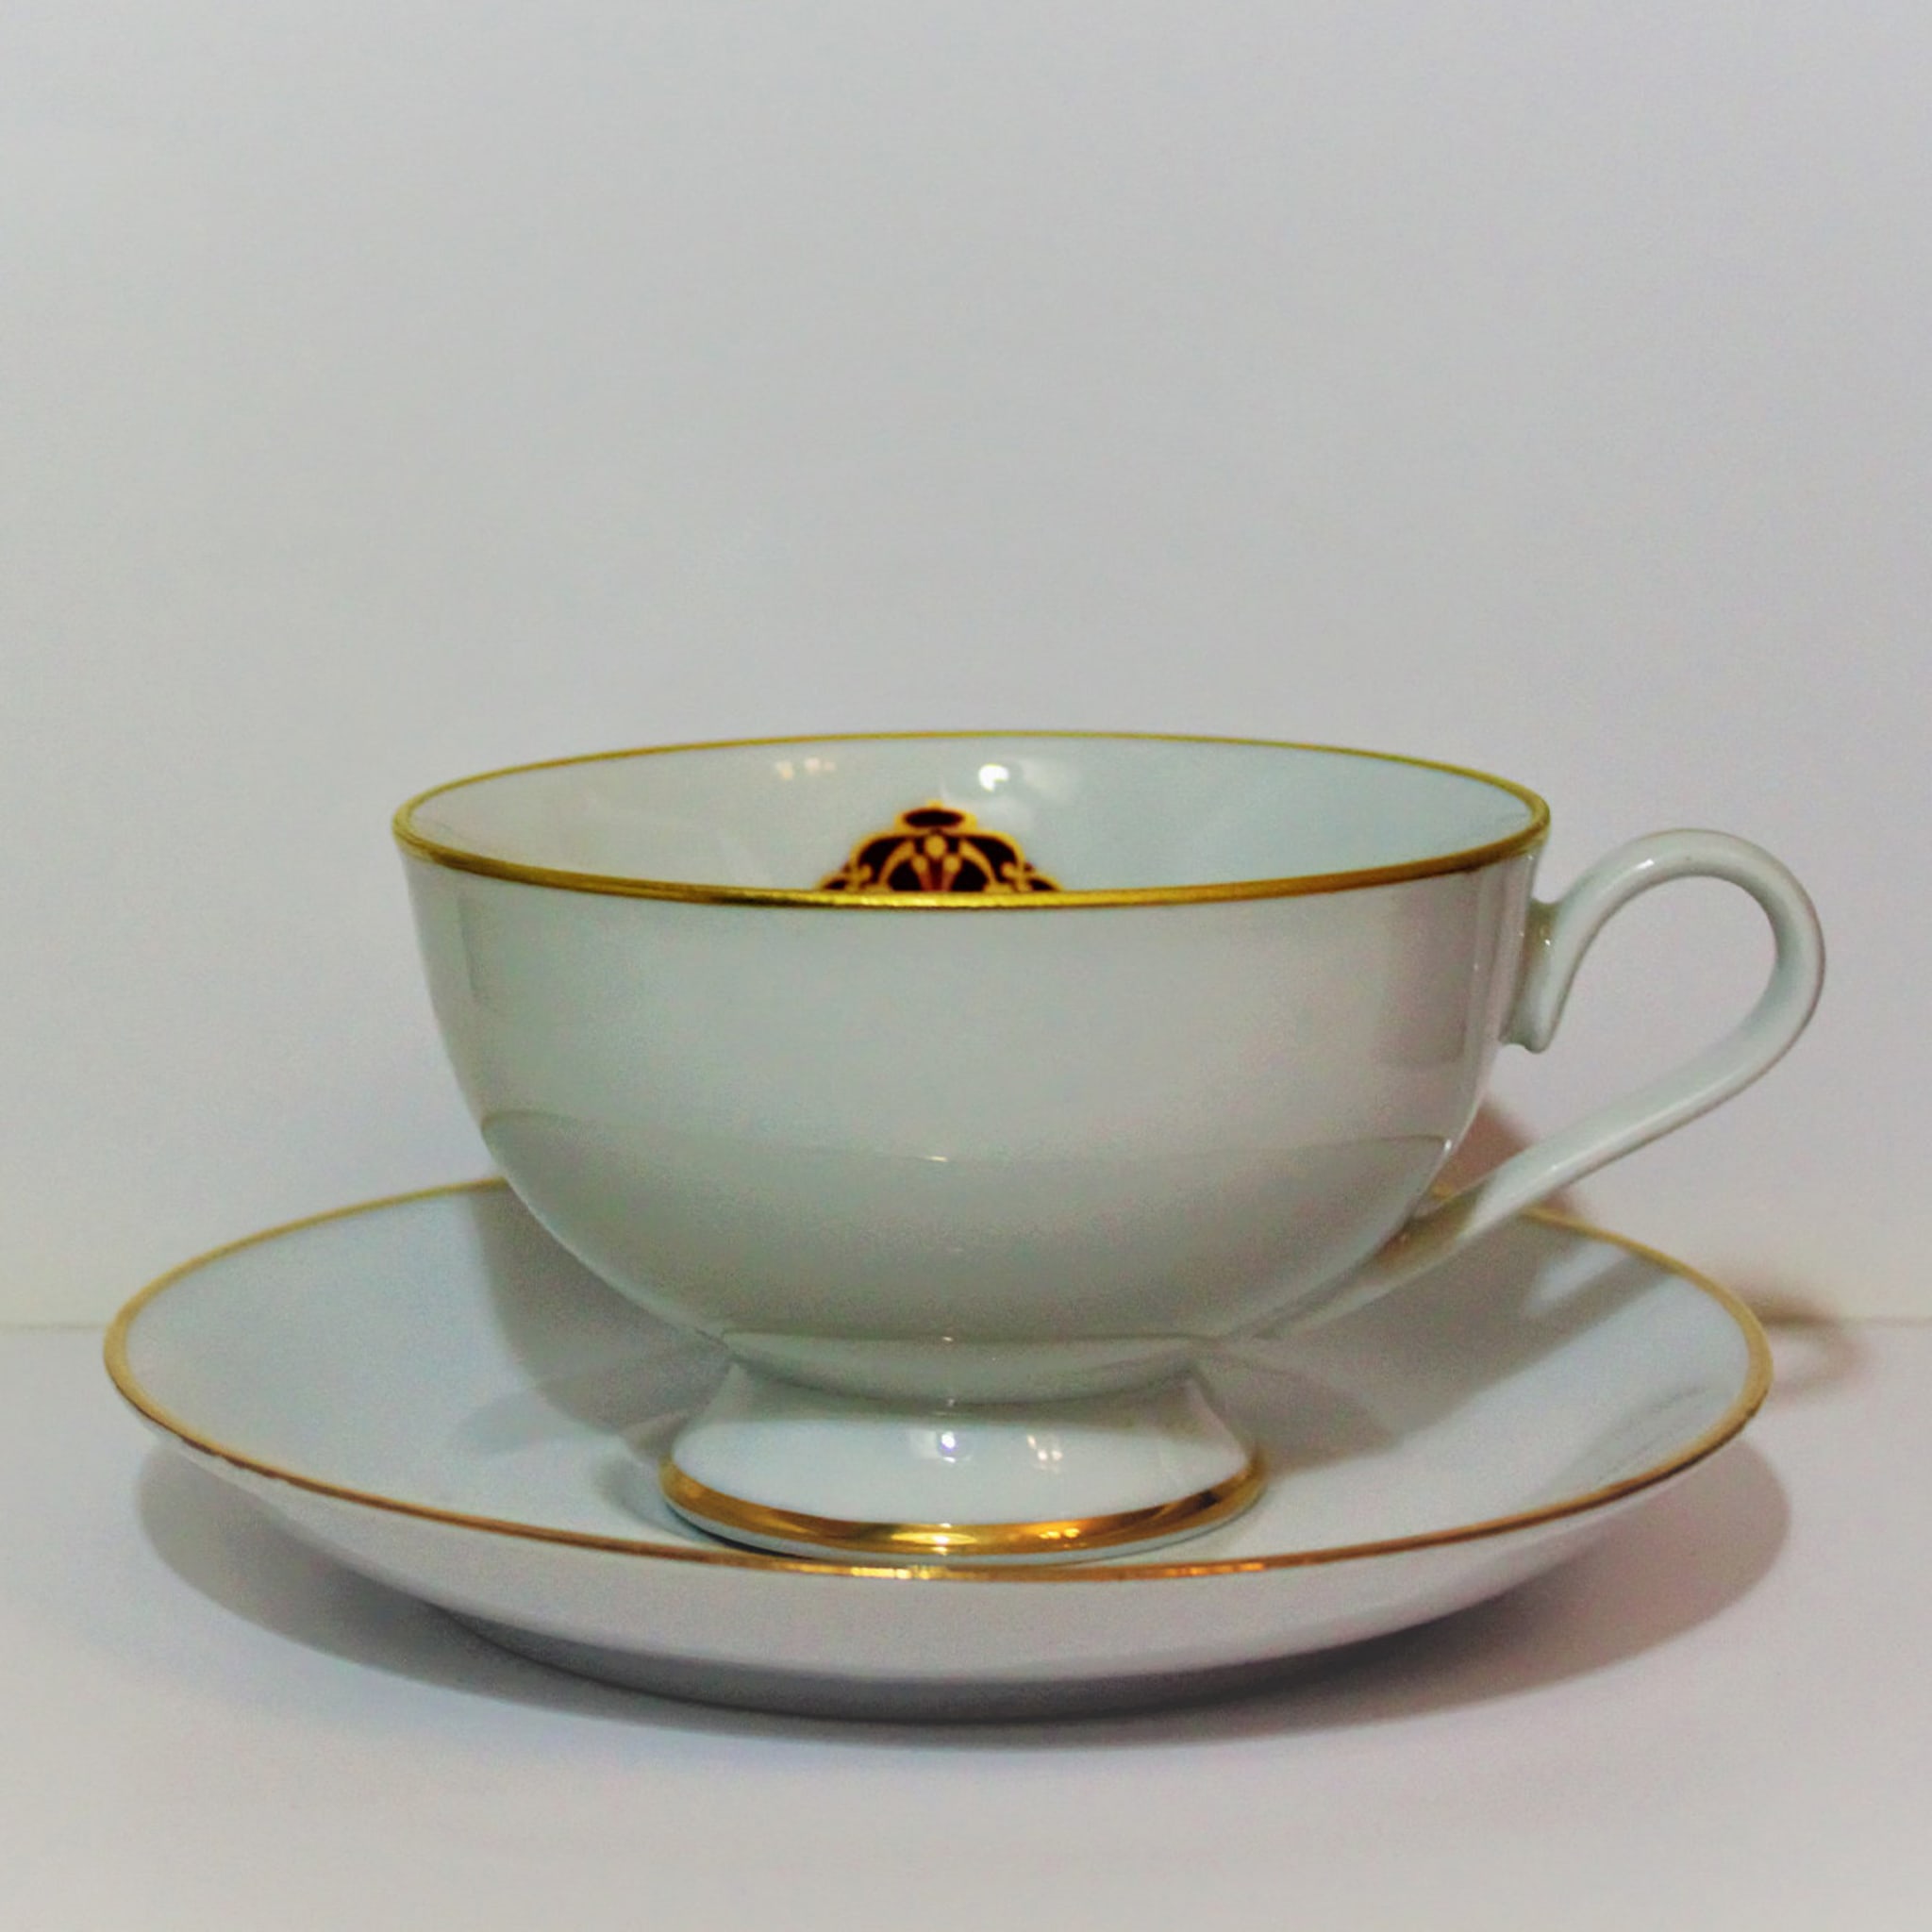 UOVO Bordeaux Tea Cup with saucer - Set of 4 - Alternative view 1